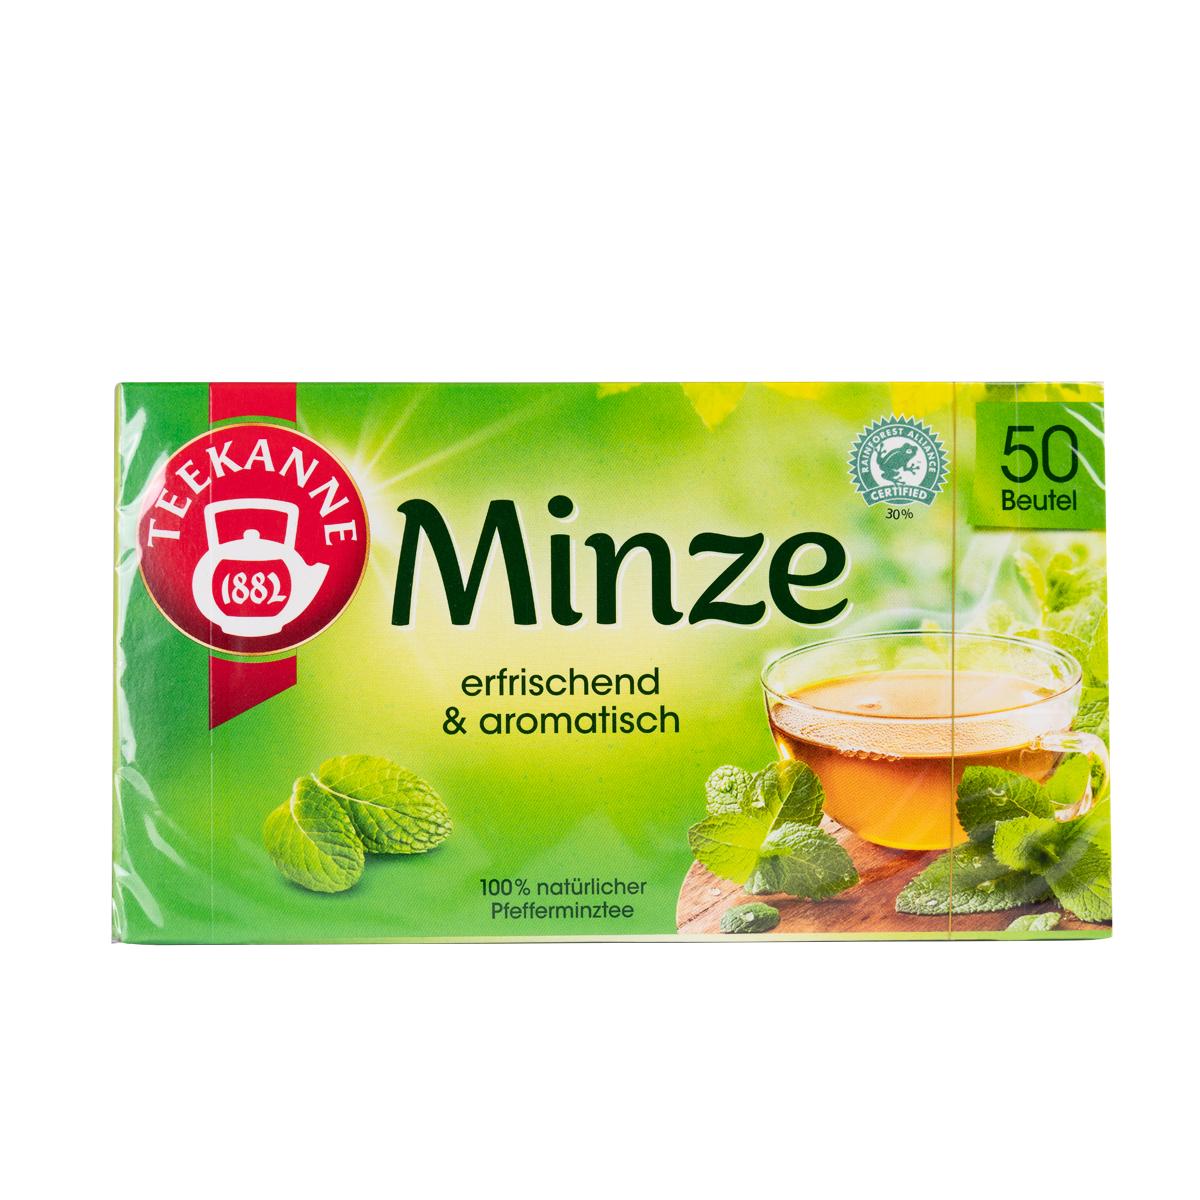 Primary image of Fix Minze (Peppermint) Tea Bags